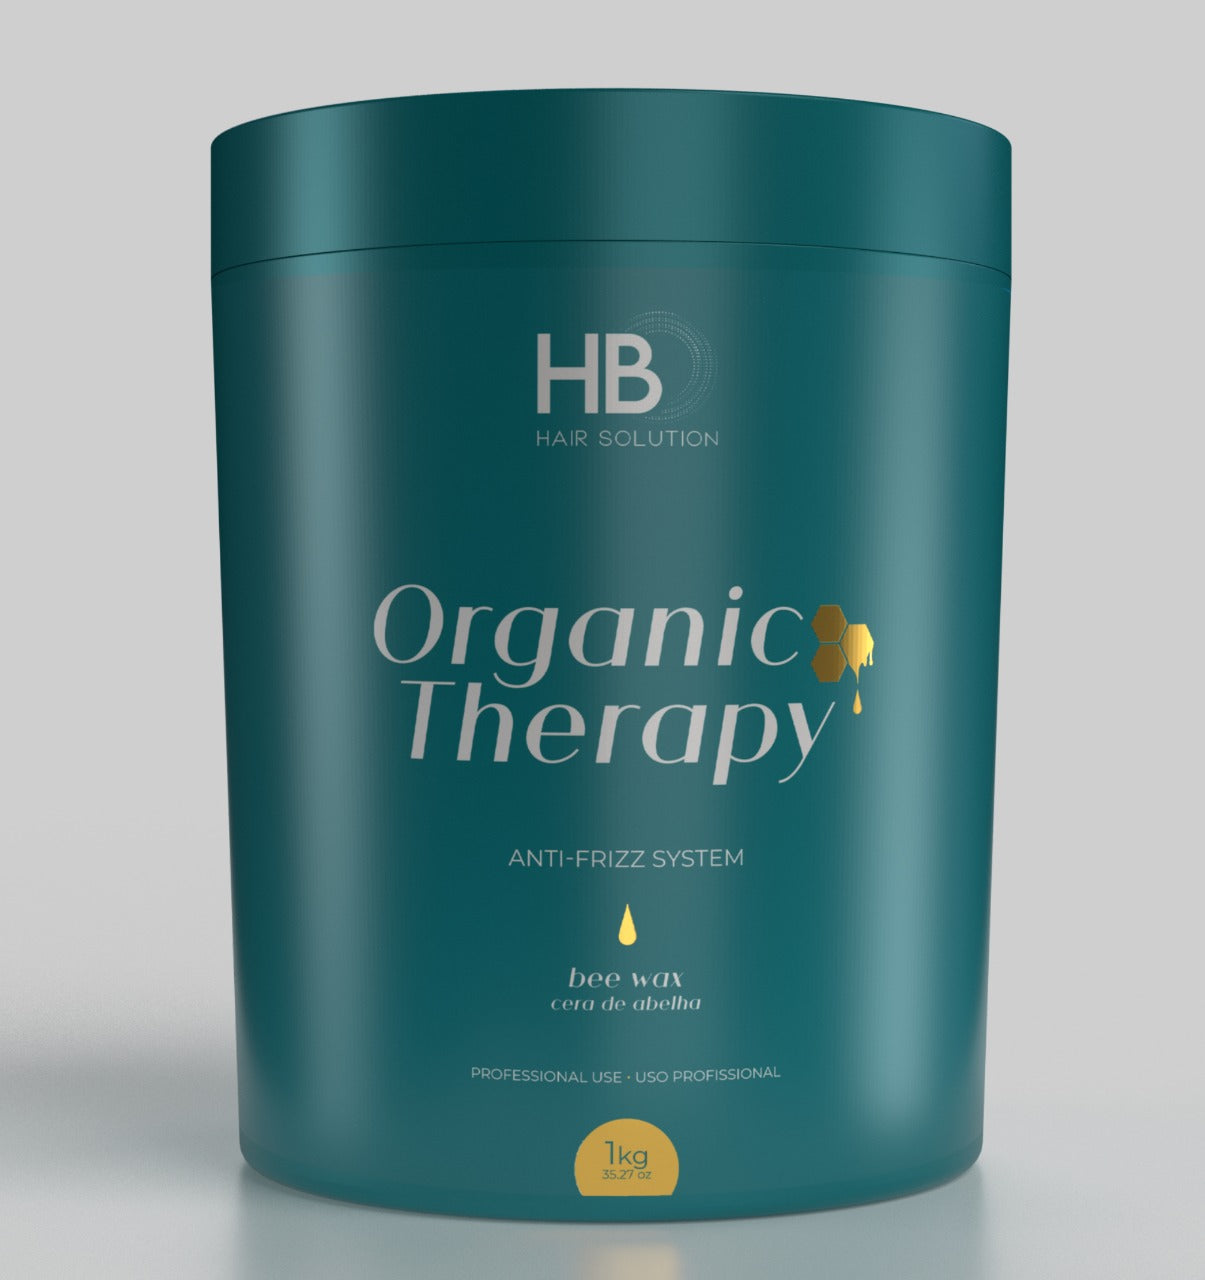 HB HAIR SOLUTION Organic Therapy Bee Wax Anti Frizz System 1 KG - JOLIE'S